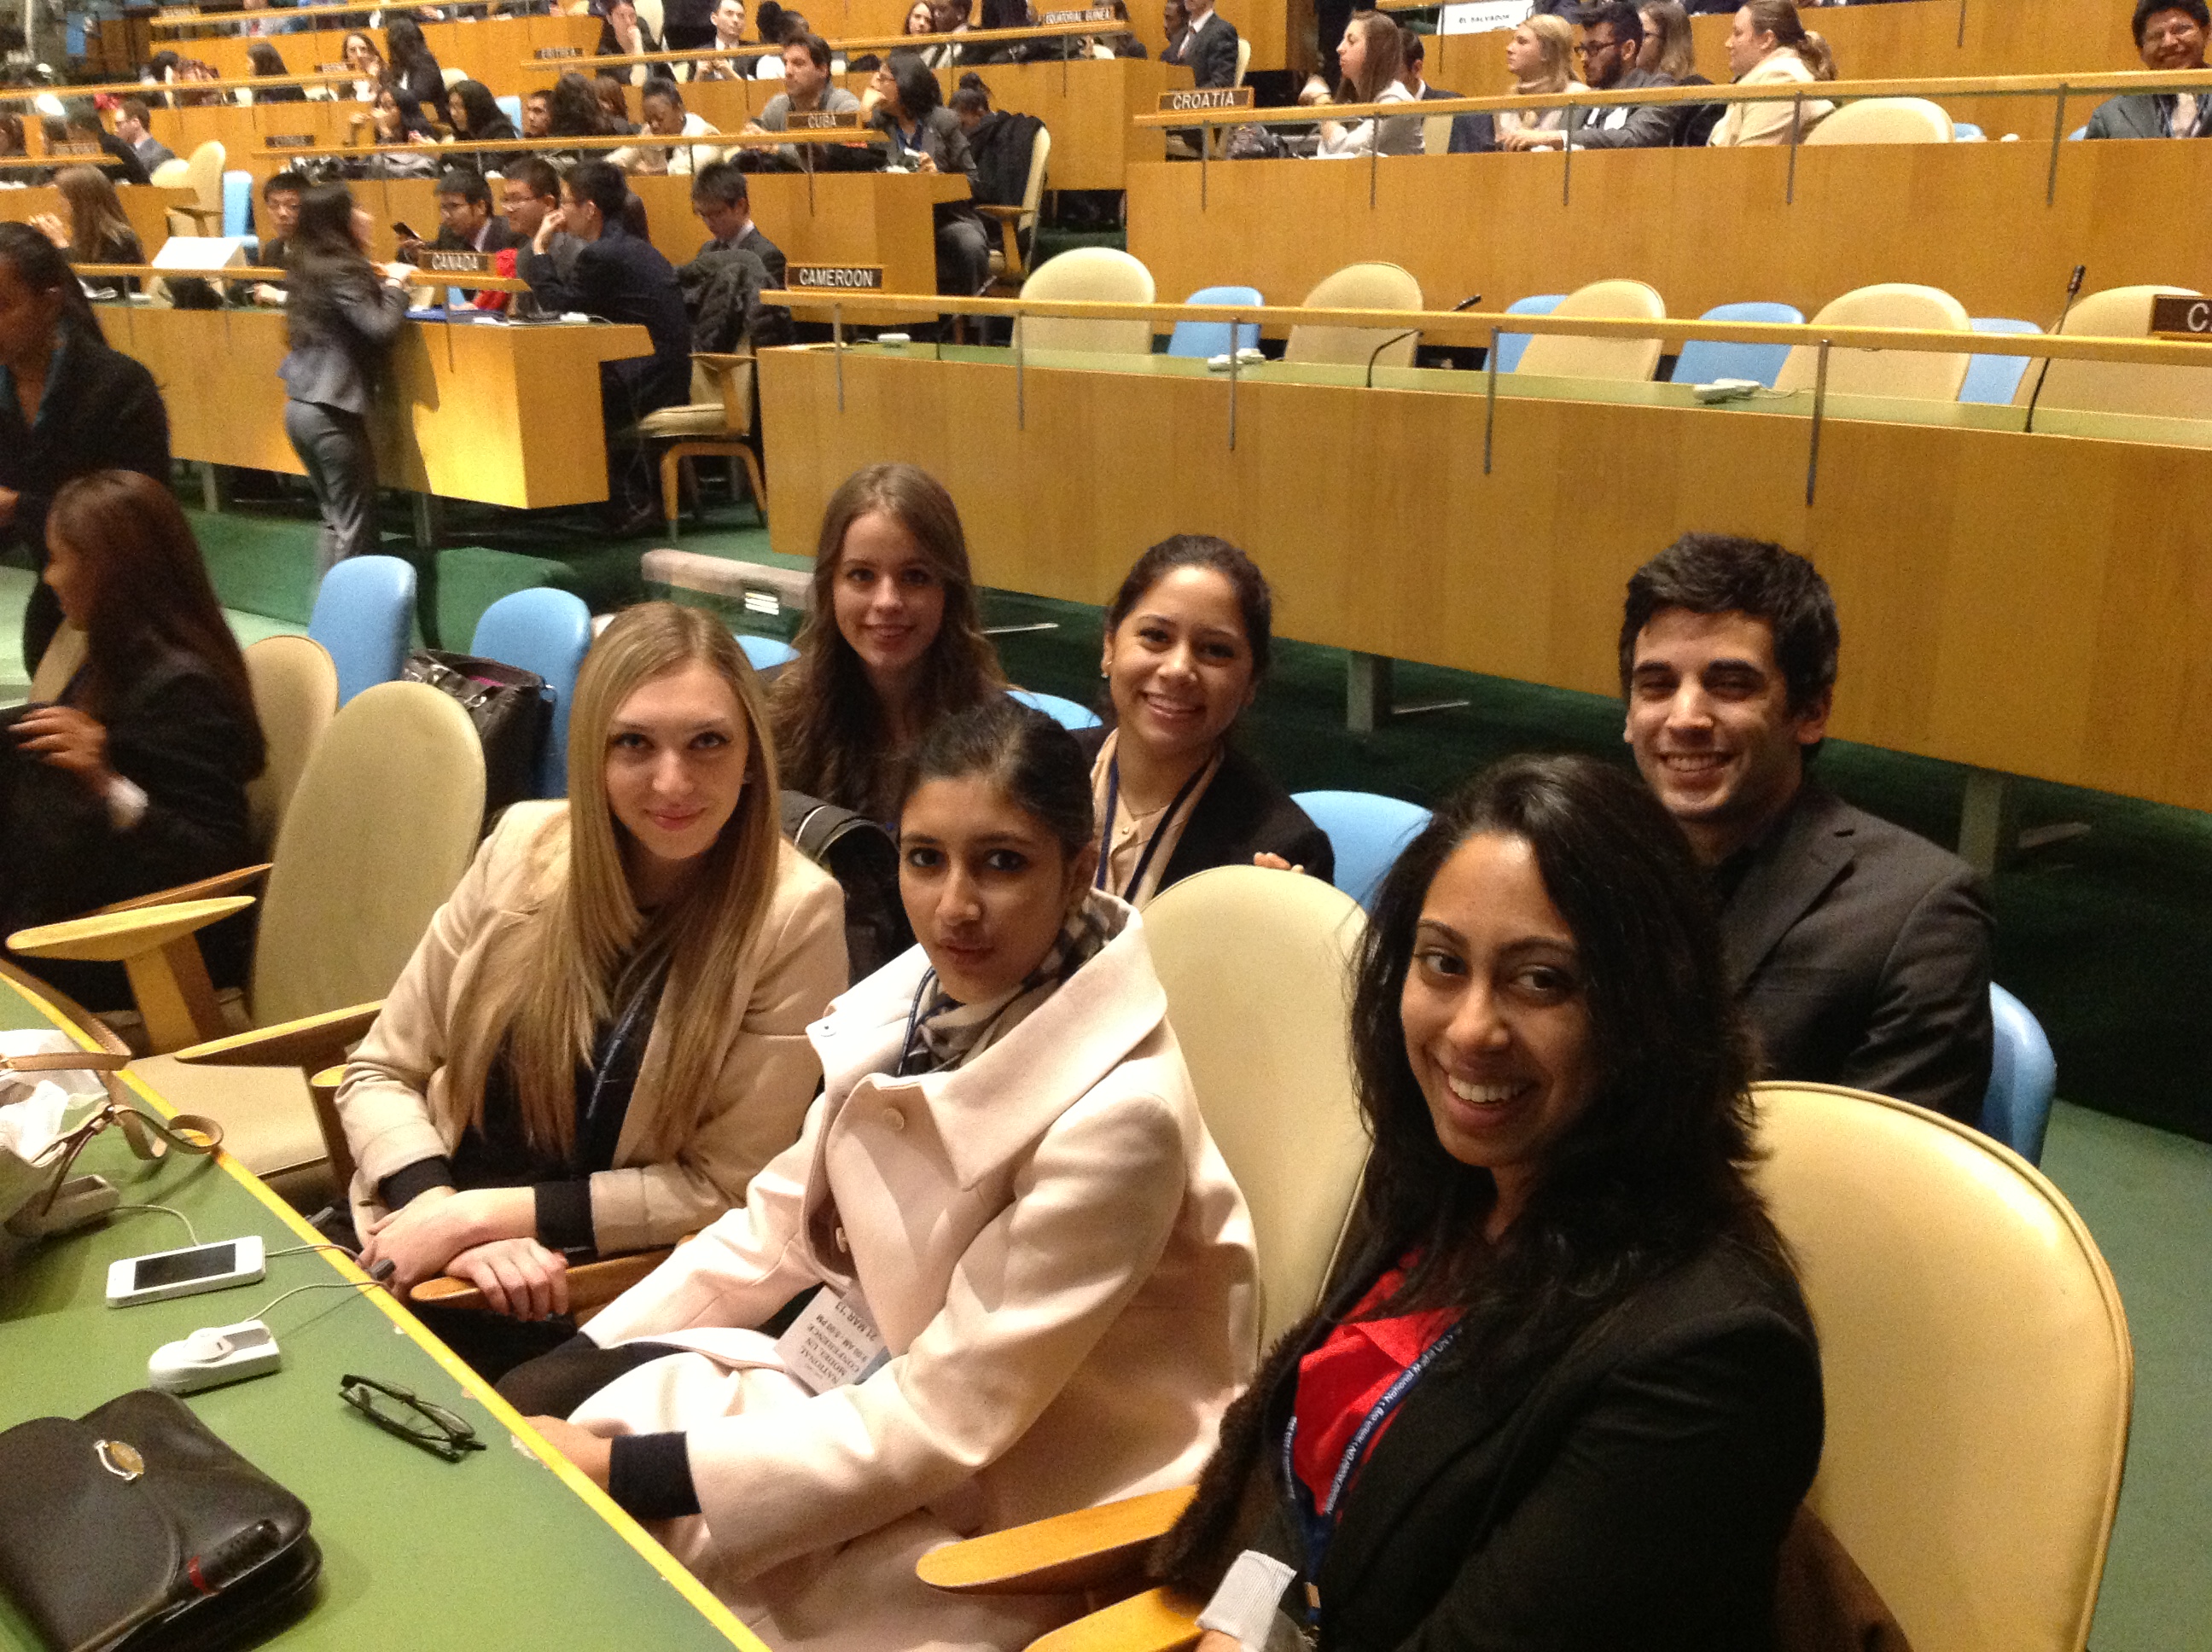 Pace University New York City students in the General Assembly Room at the 2013 National Moden UN Conference.